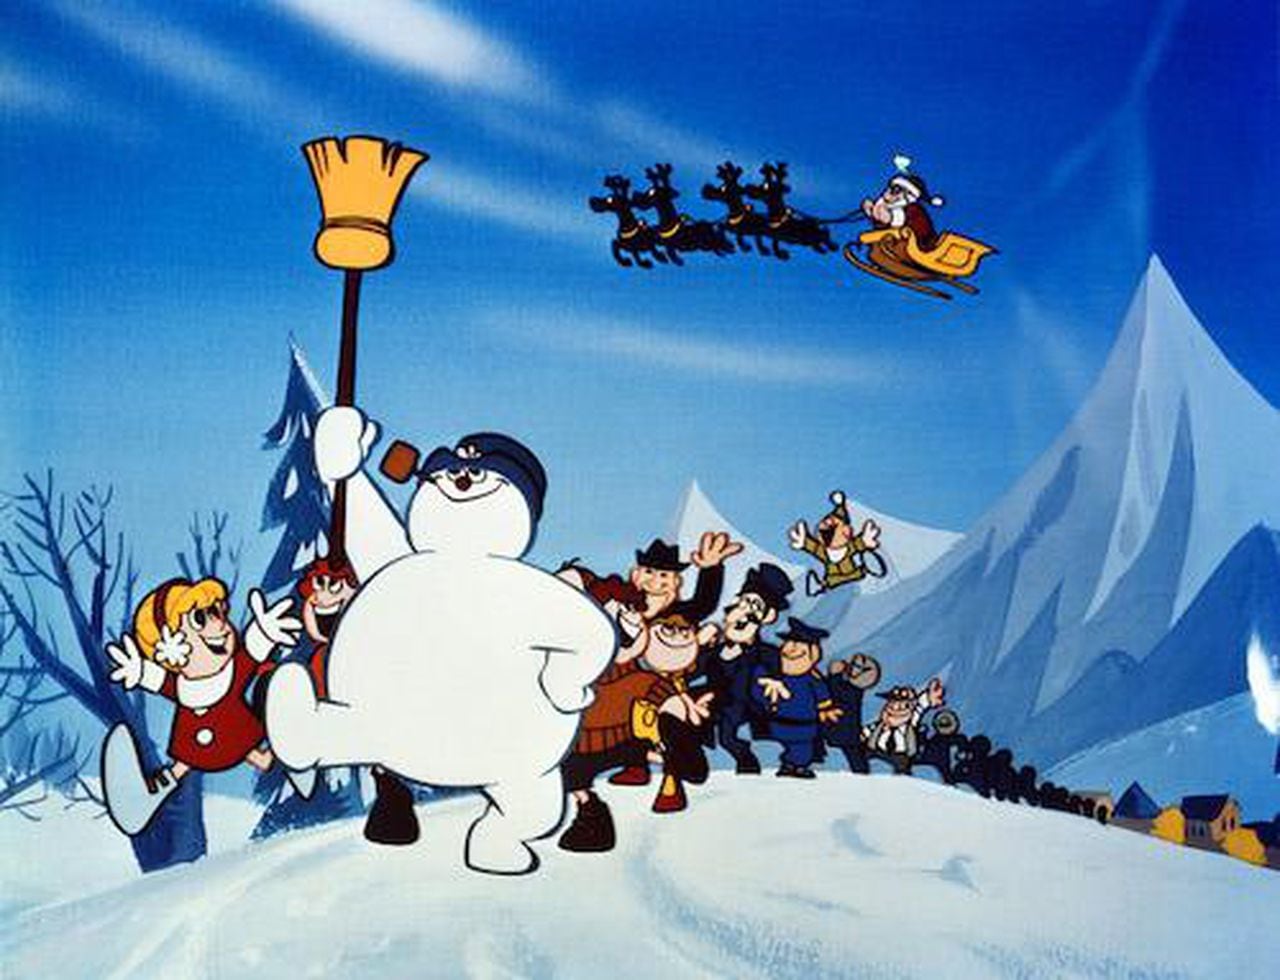 adeline cantrell recommends watch frosty the snowman online pic